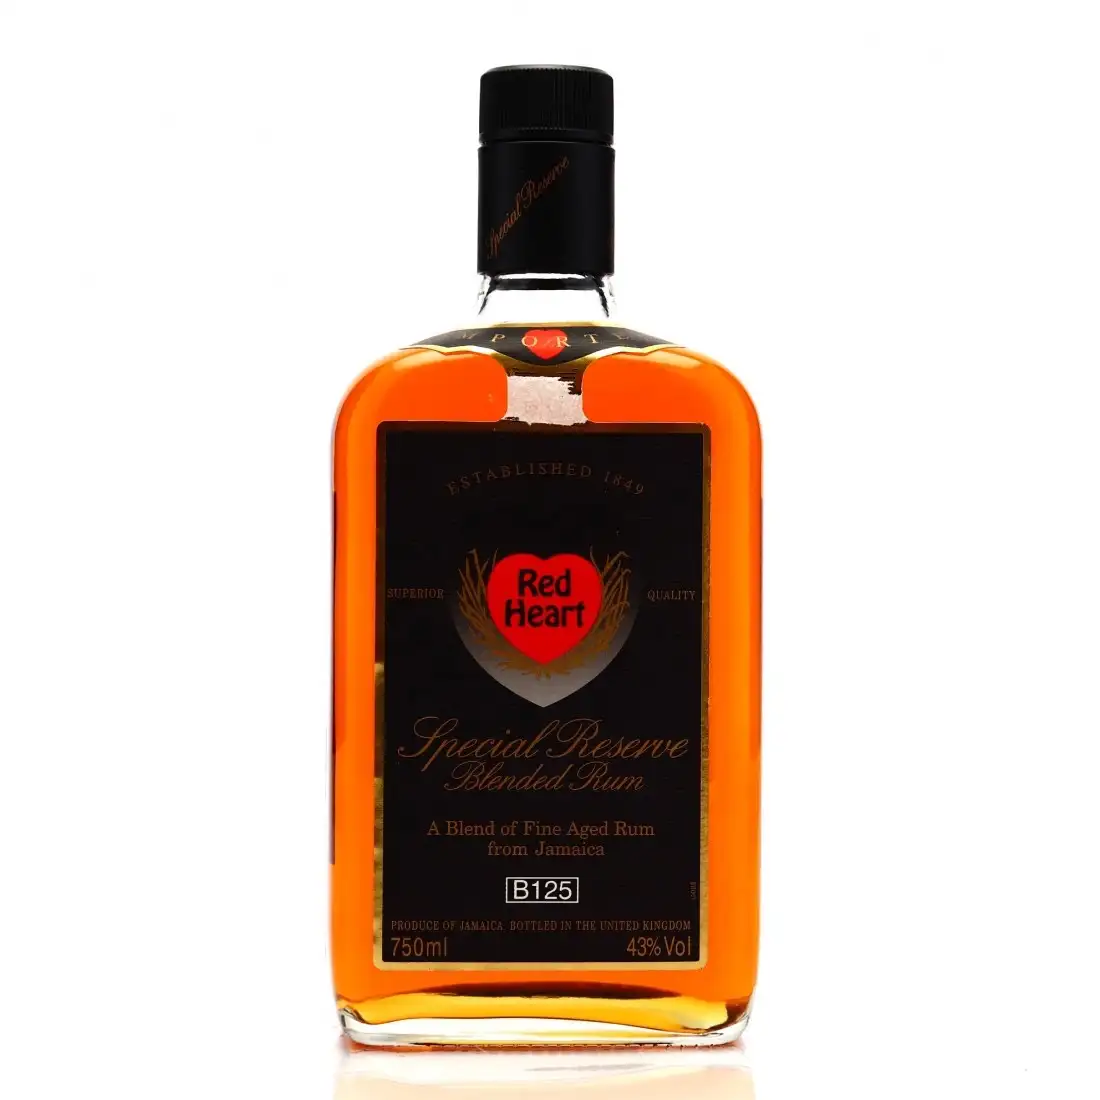 Image of the front of the bottle of the rum Red Heart Special Reserve